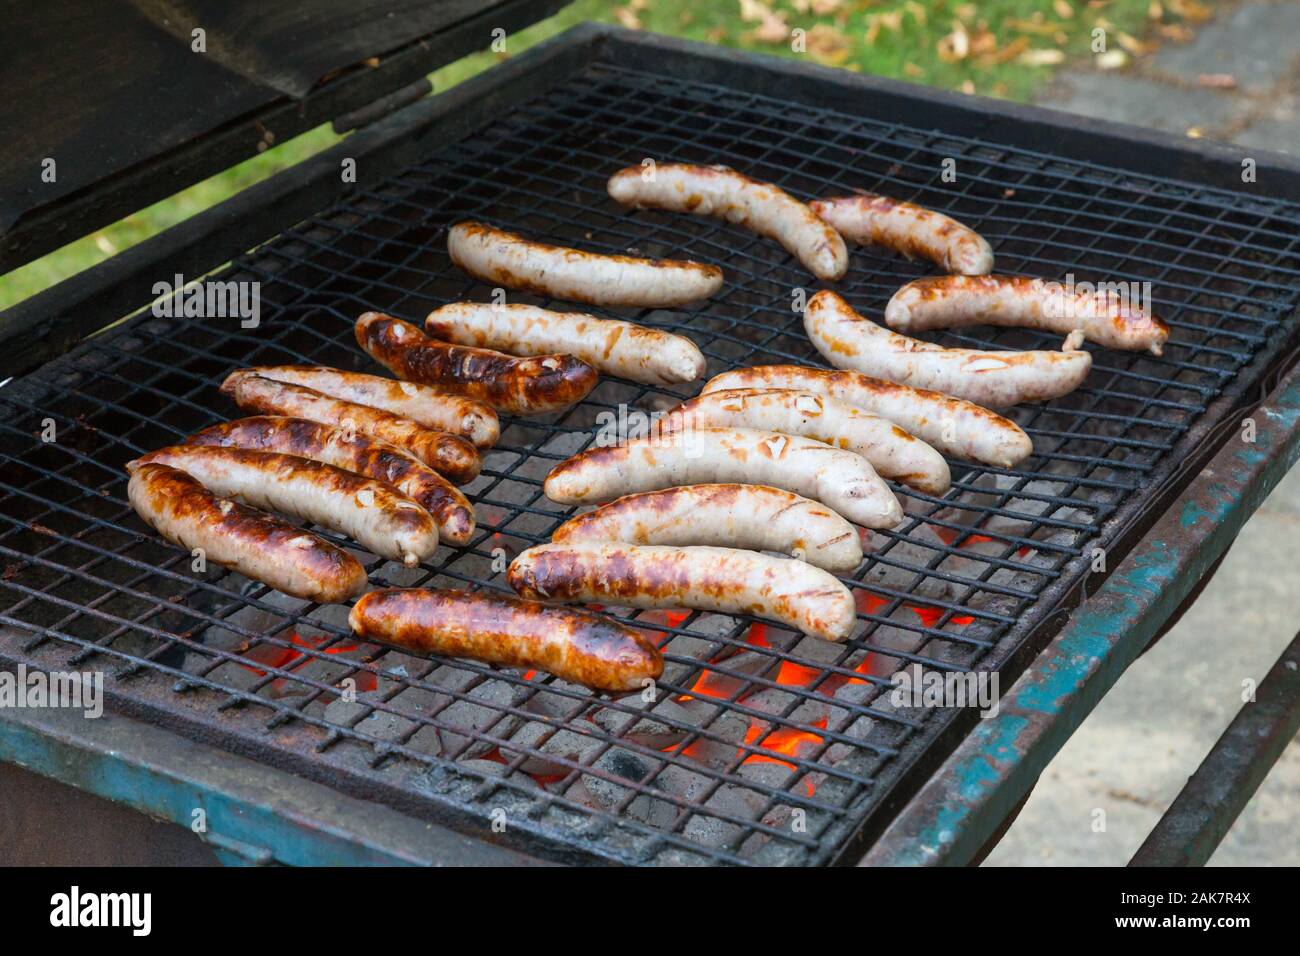 sausages on barbecue Stock Photo